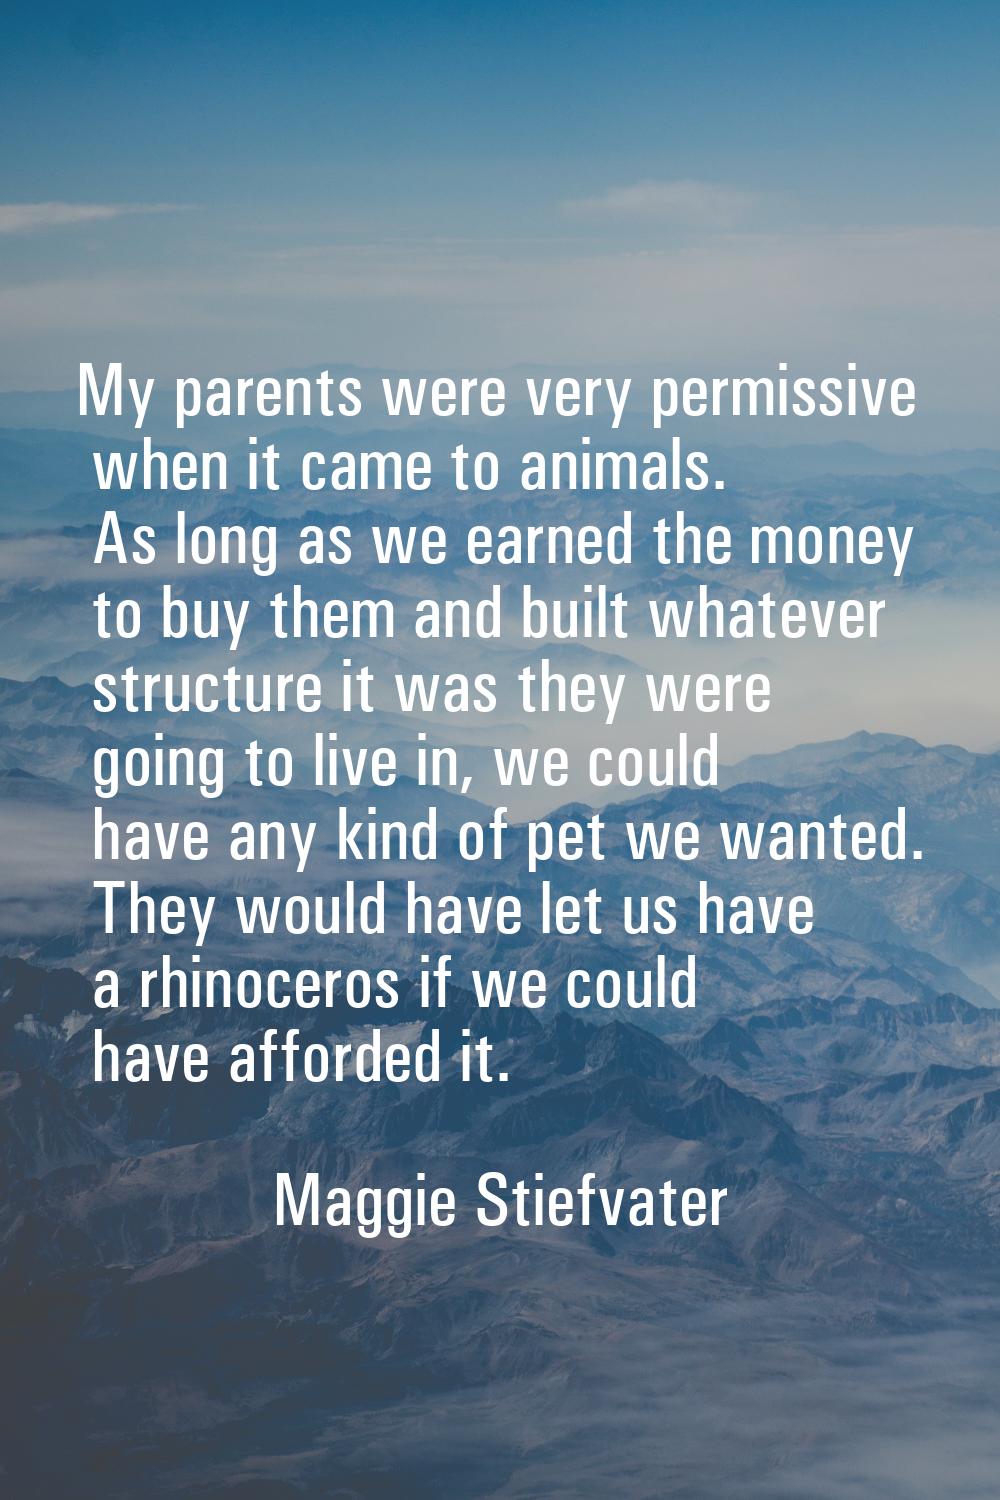 My parents were very permissive when it came to animals. As long as we earned the money to buy them